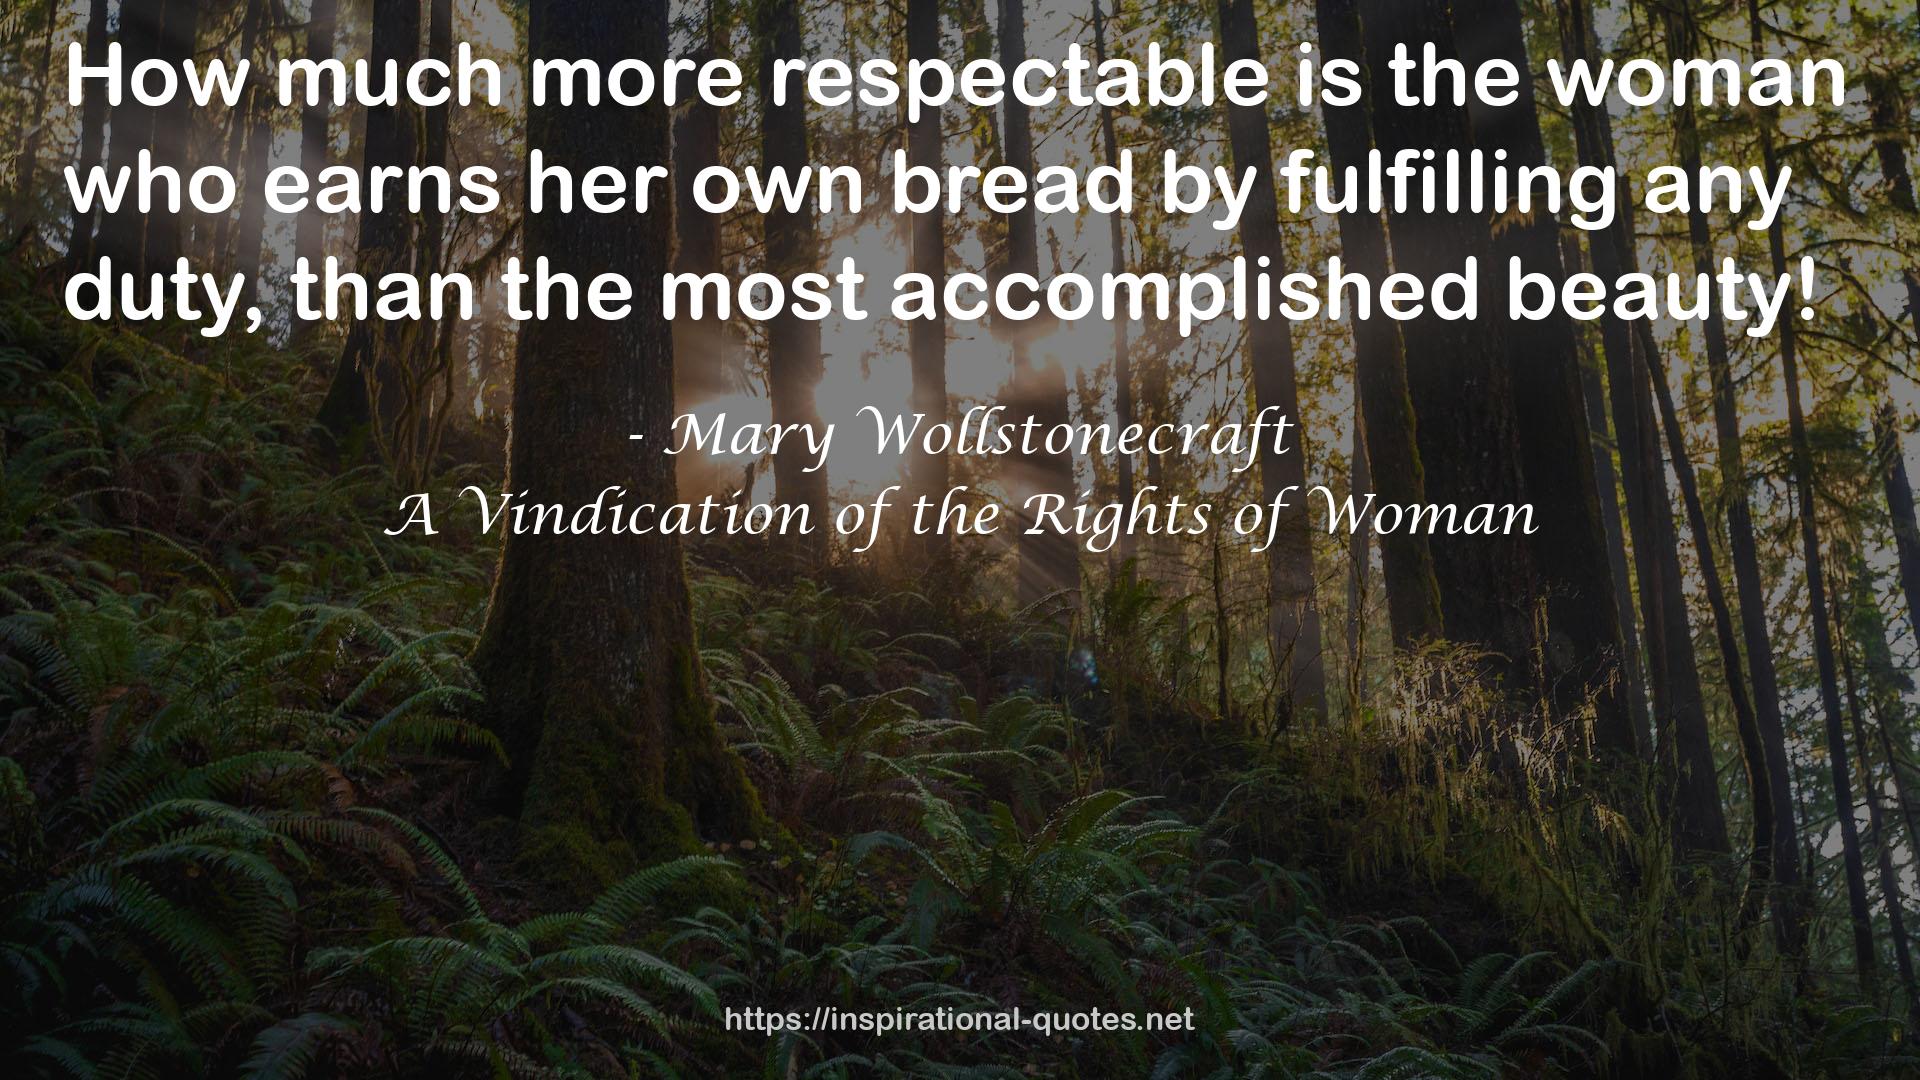 A Vindication of the Rights of Woman QUOTES